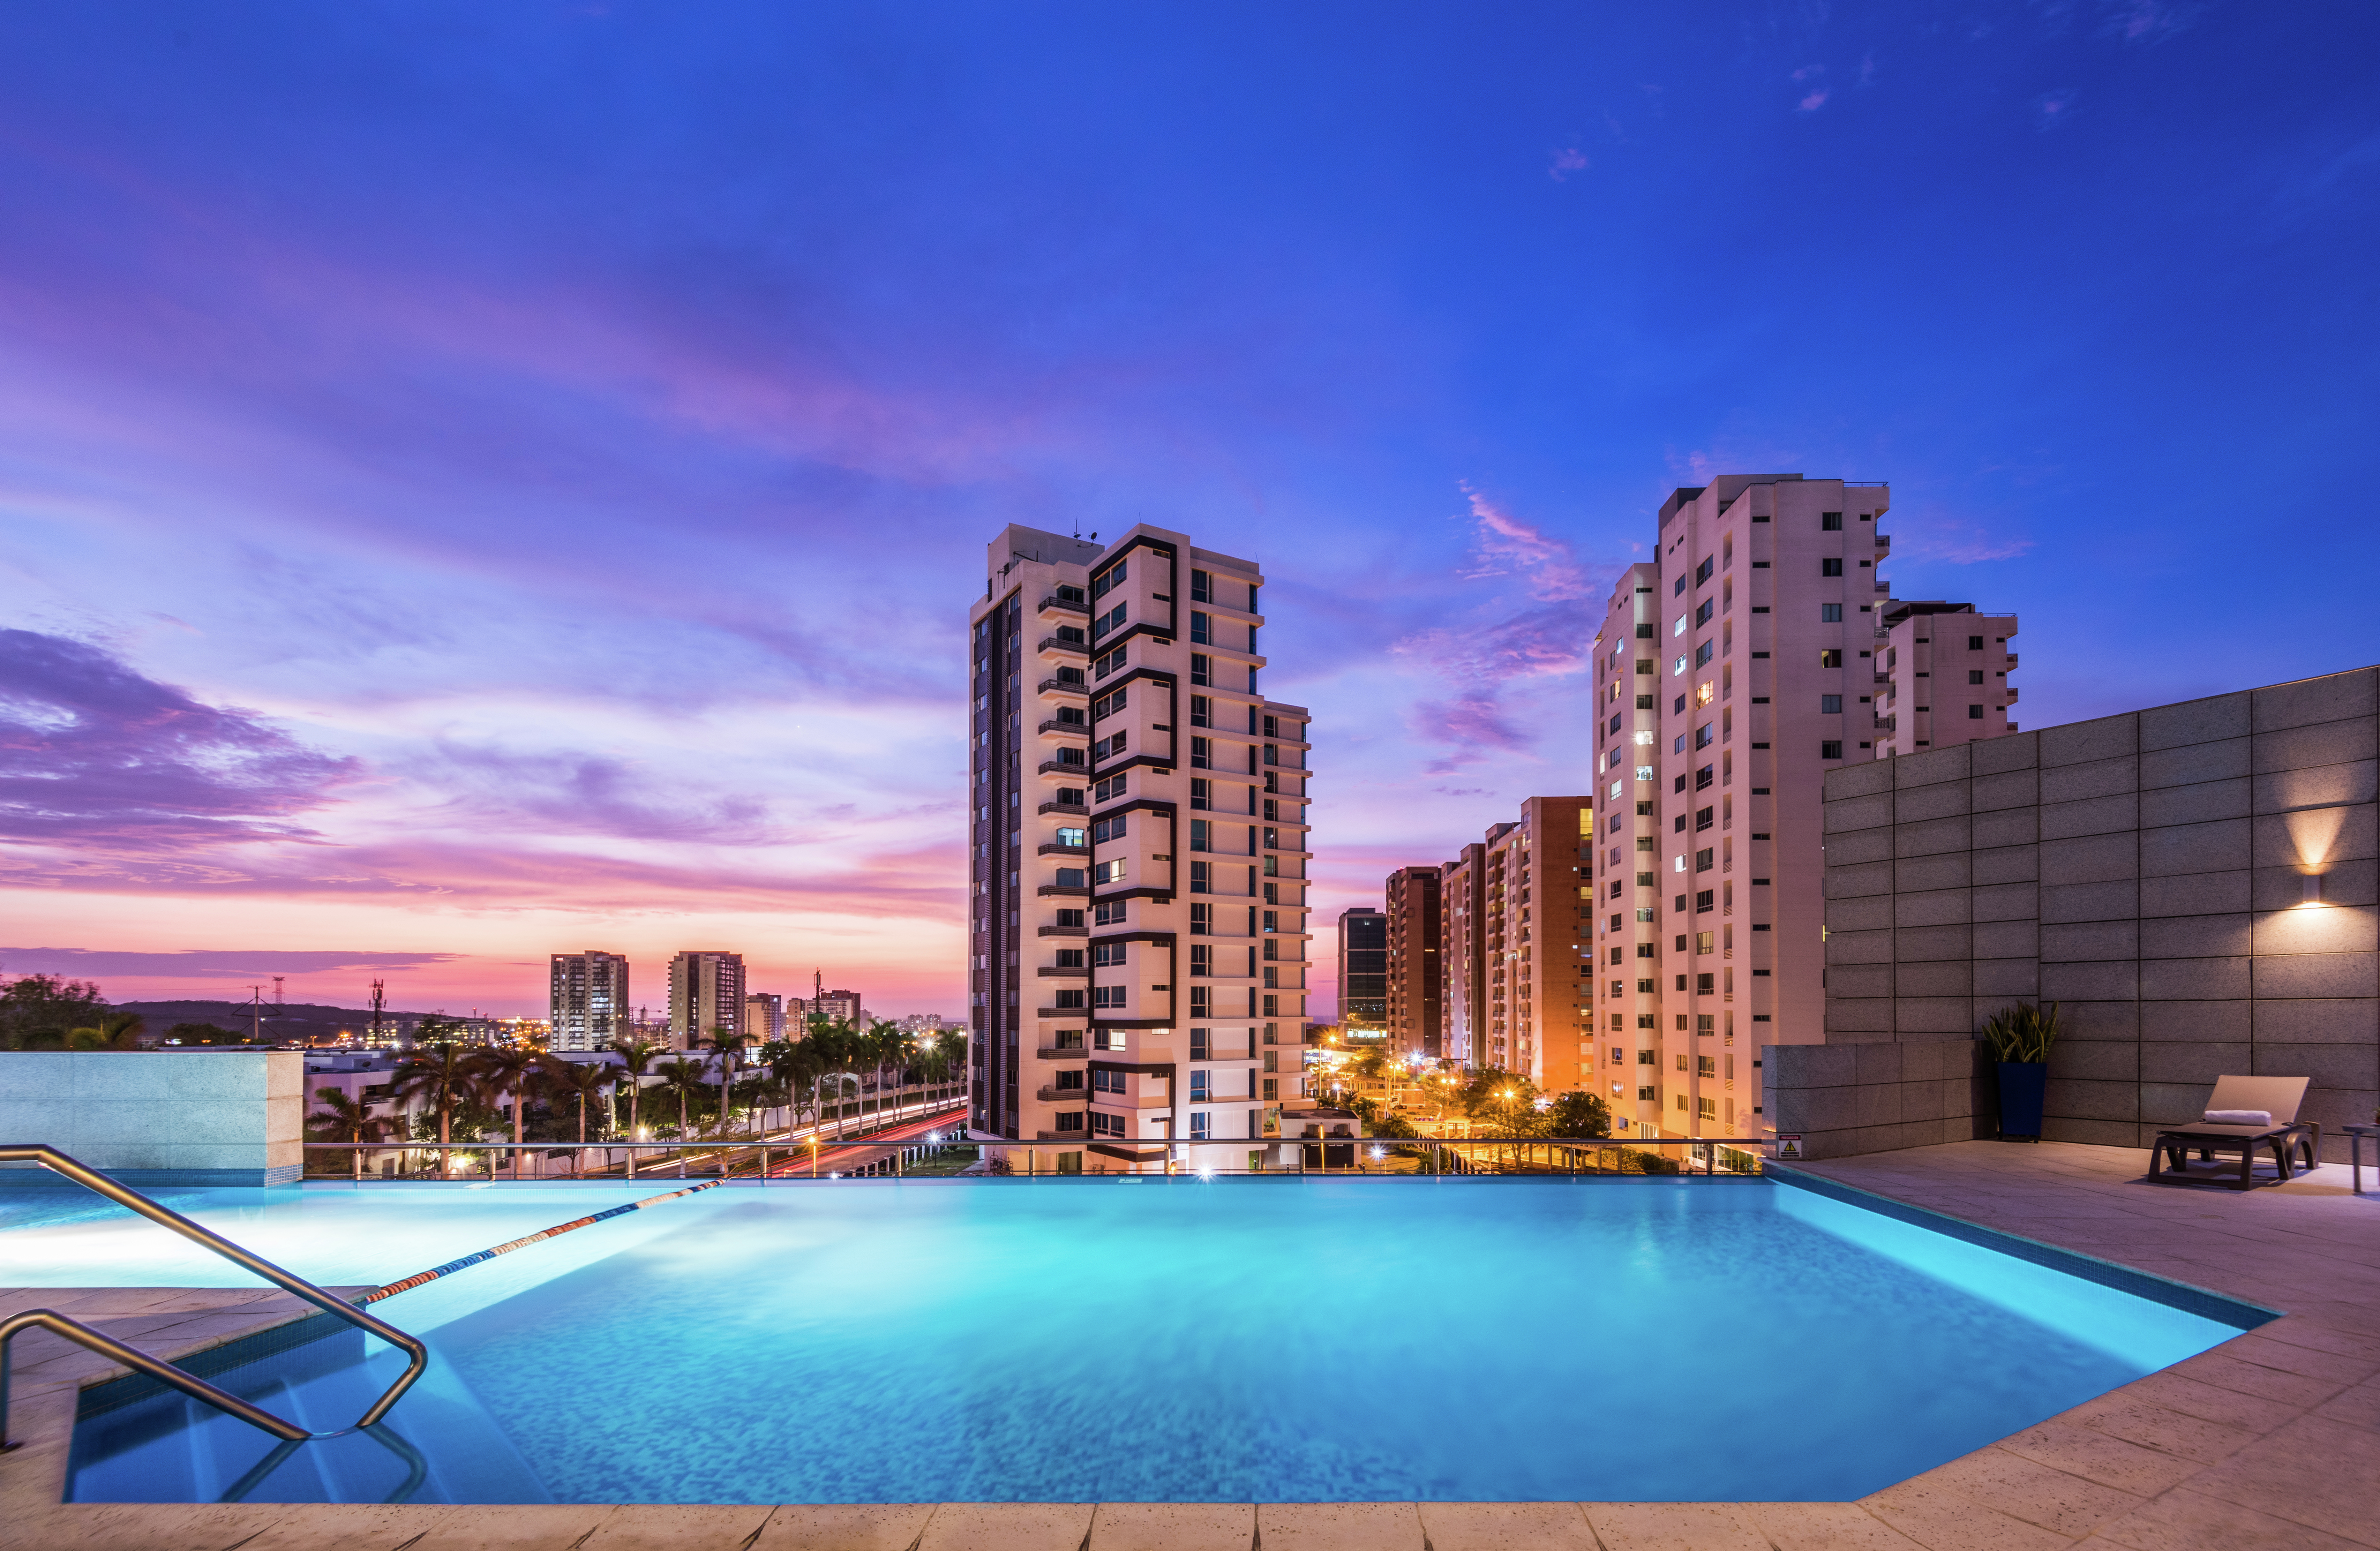 Infinity pool with sunset sky and view of tall buildings